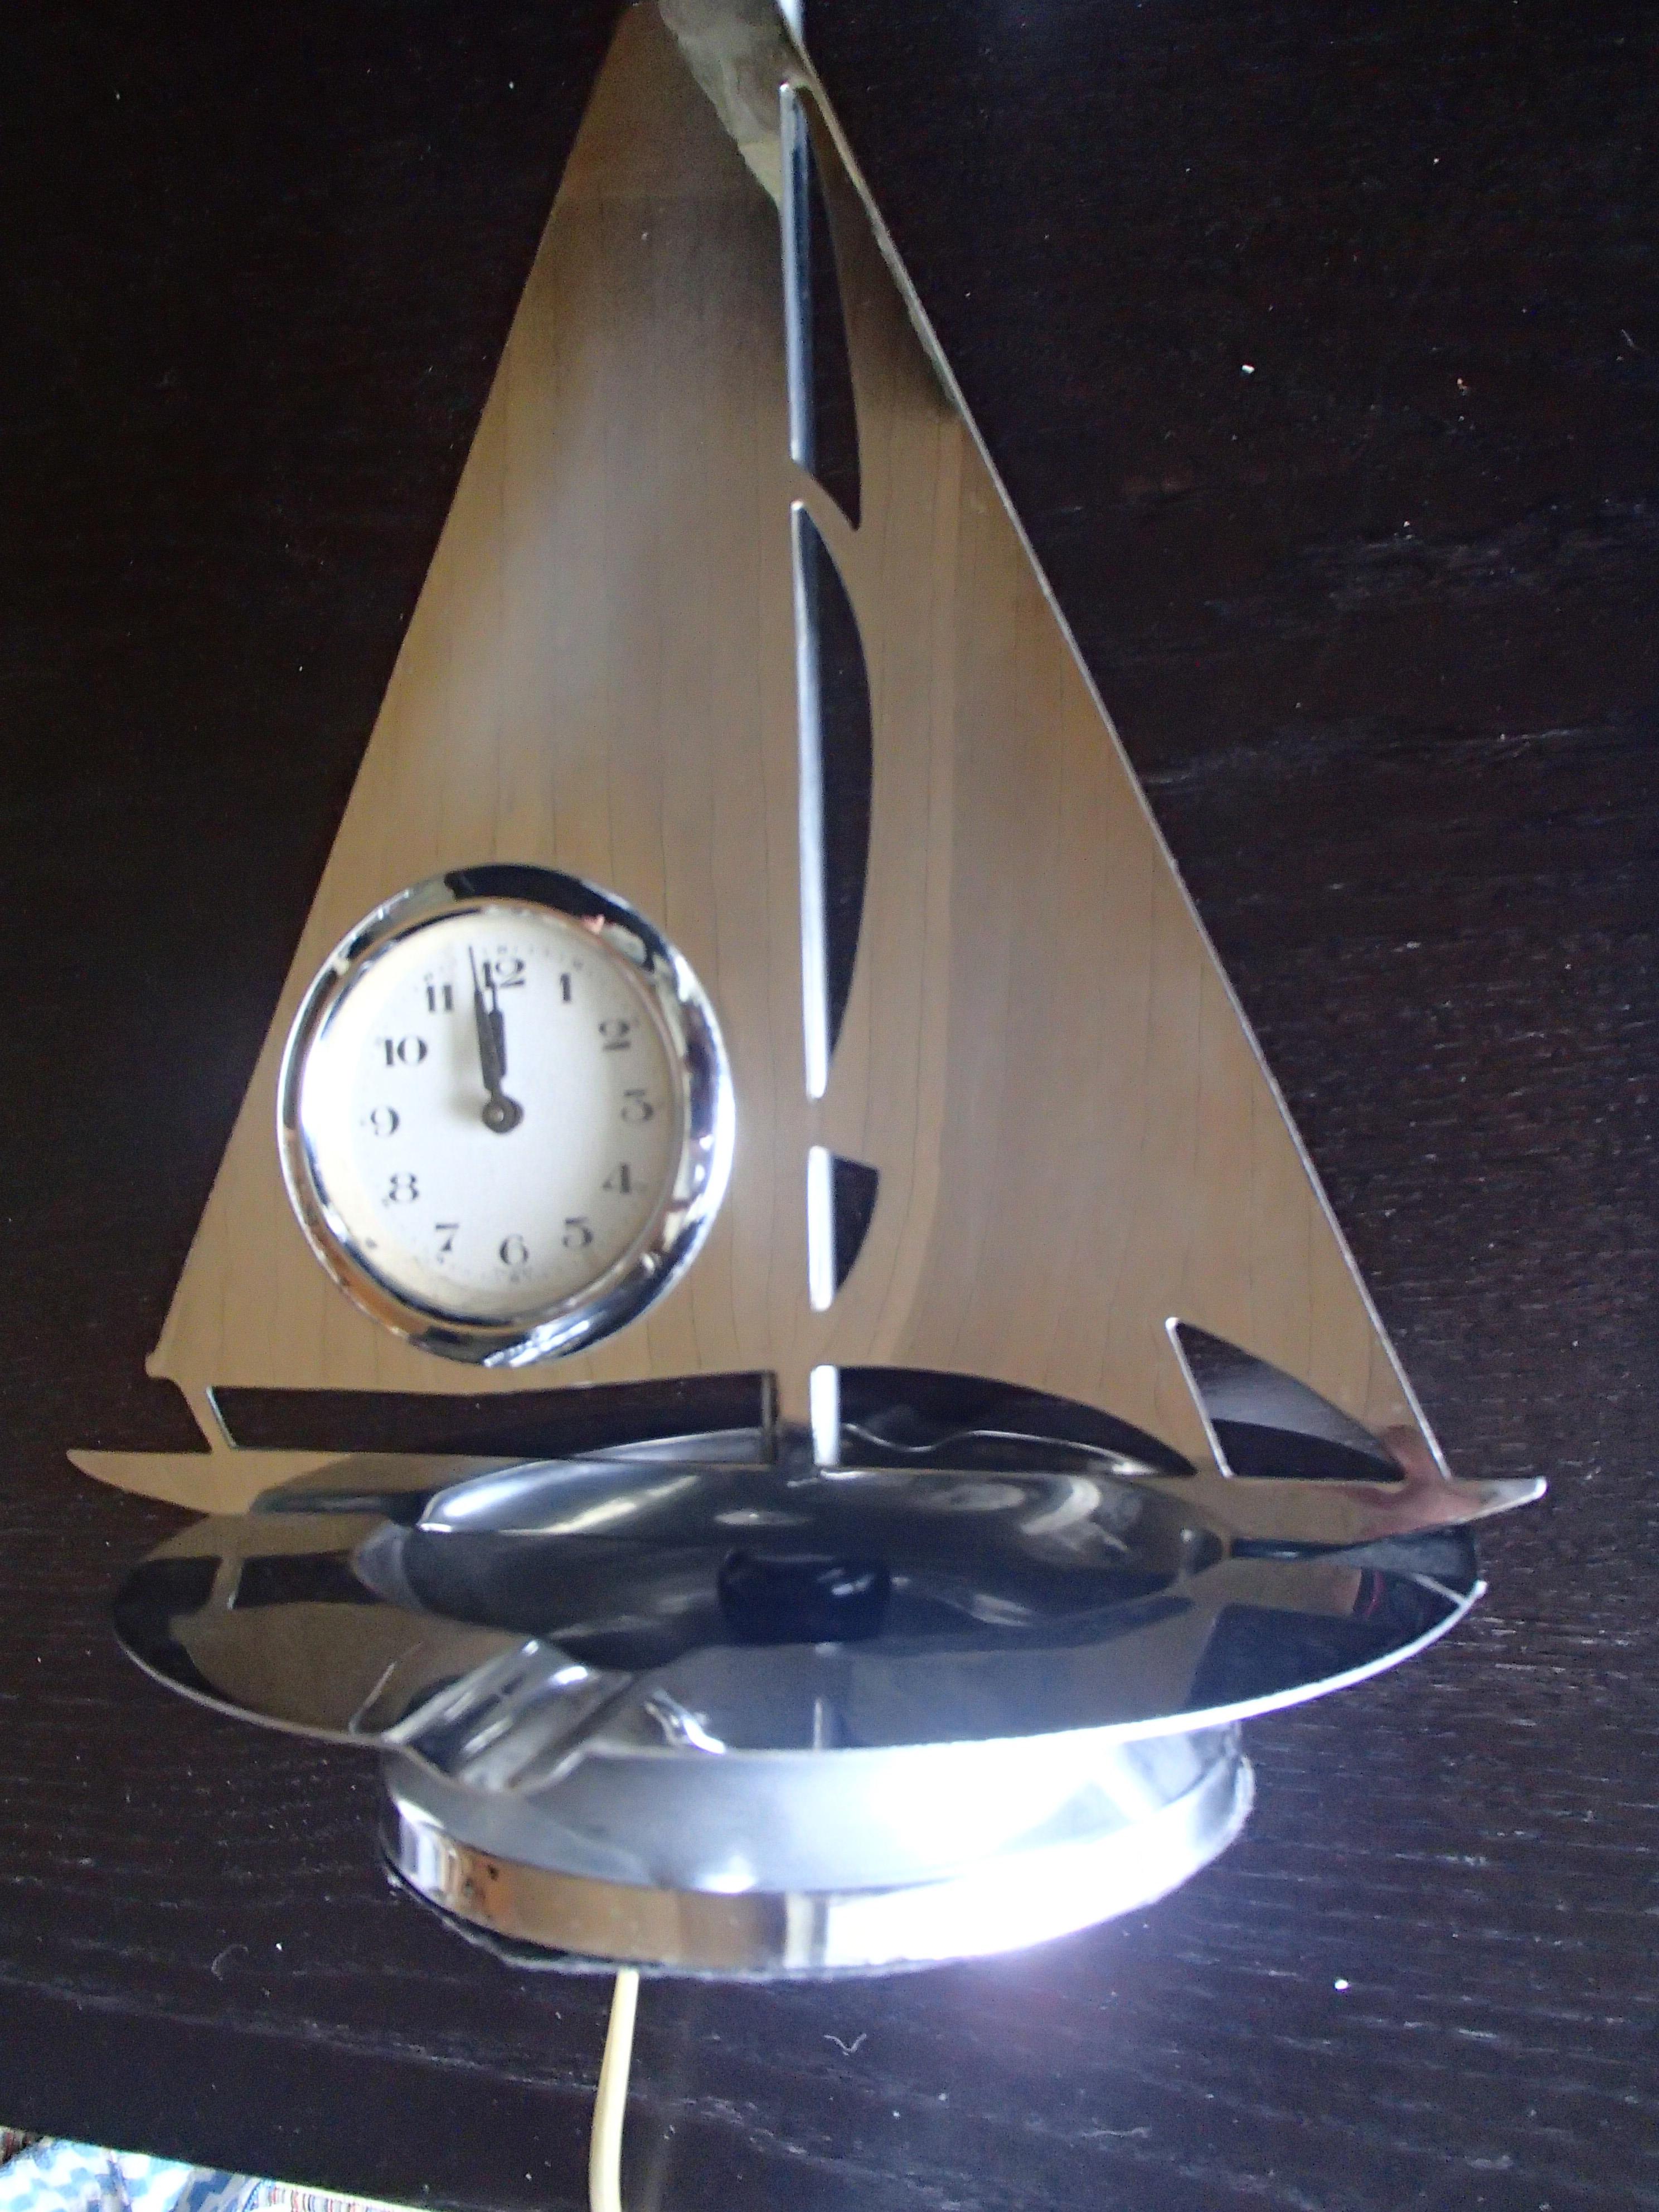 Mid-20th Century Art Deco Chrom Sailing Boat Table Lamp with Clock and Ashtree